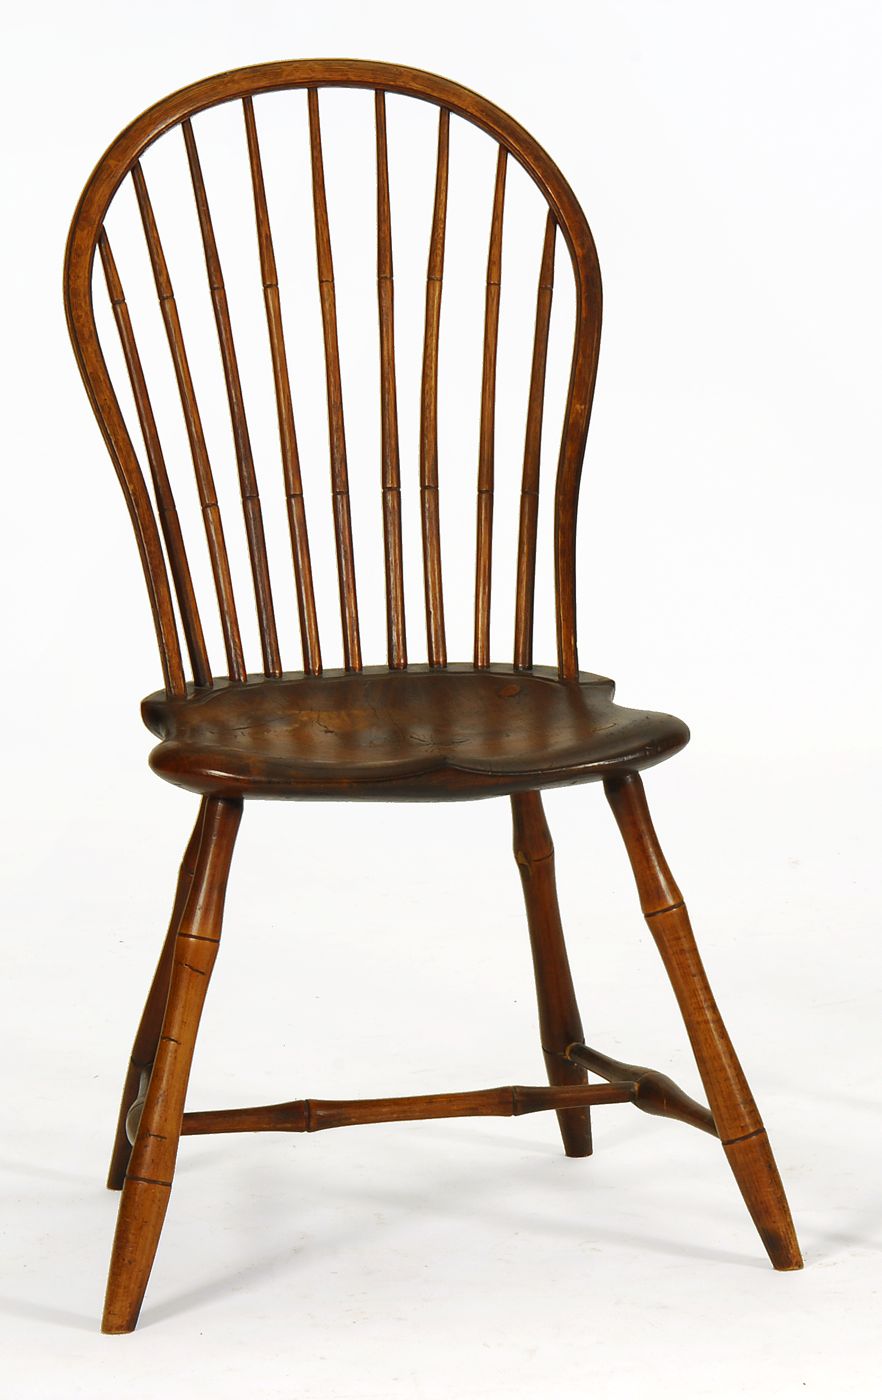 ANTIQUE BOWBACK WINDSOR CHAIRCirca